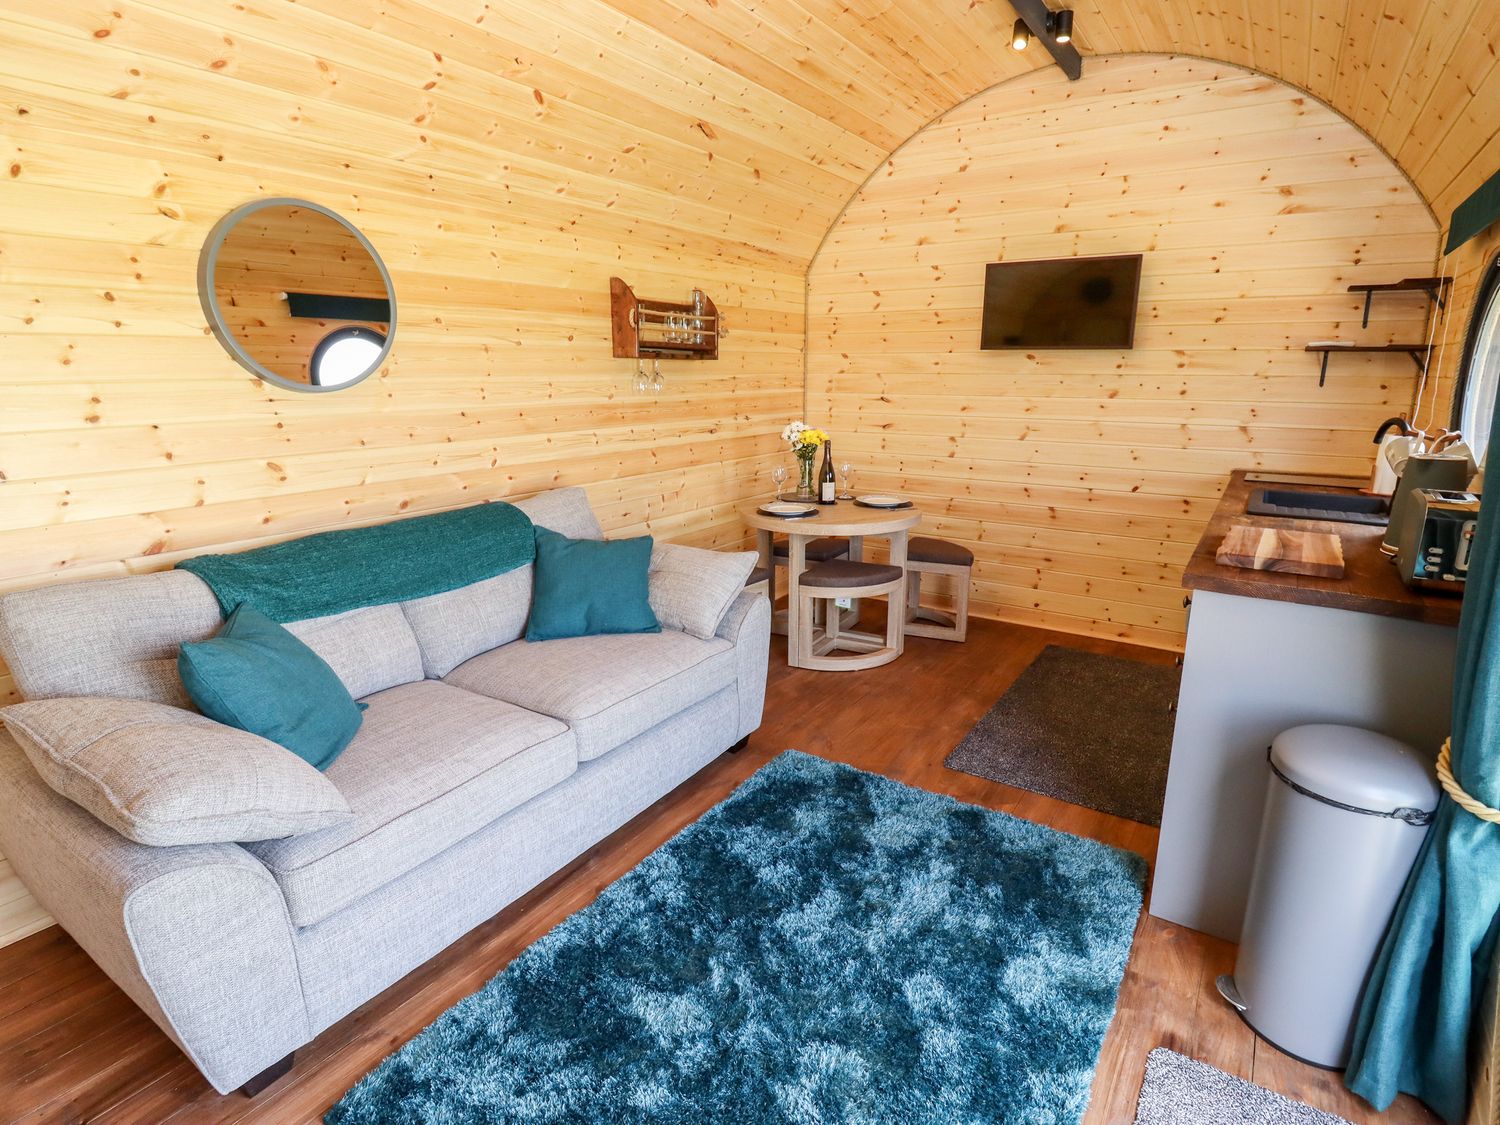 The Happy Valley Pod, Chipping Norton